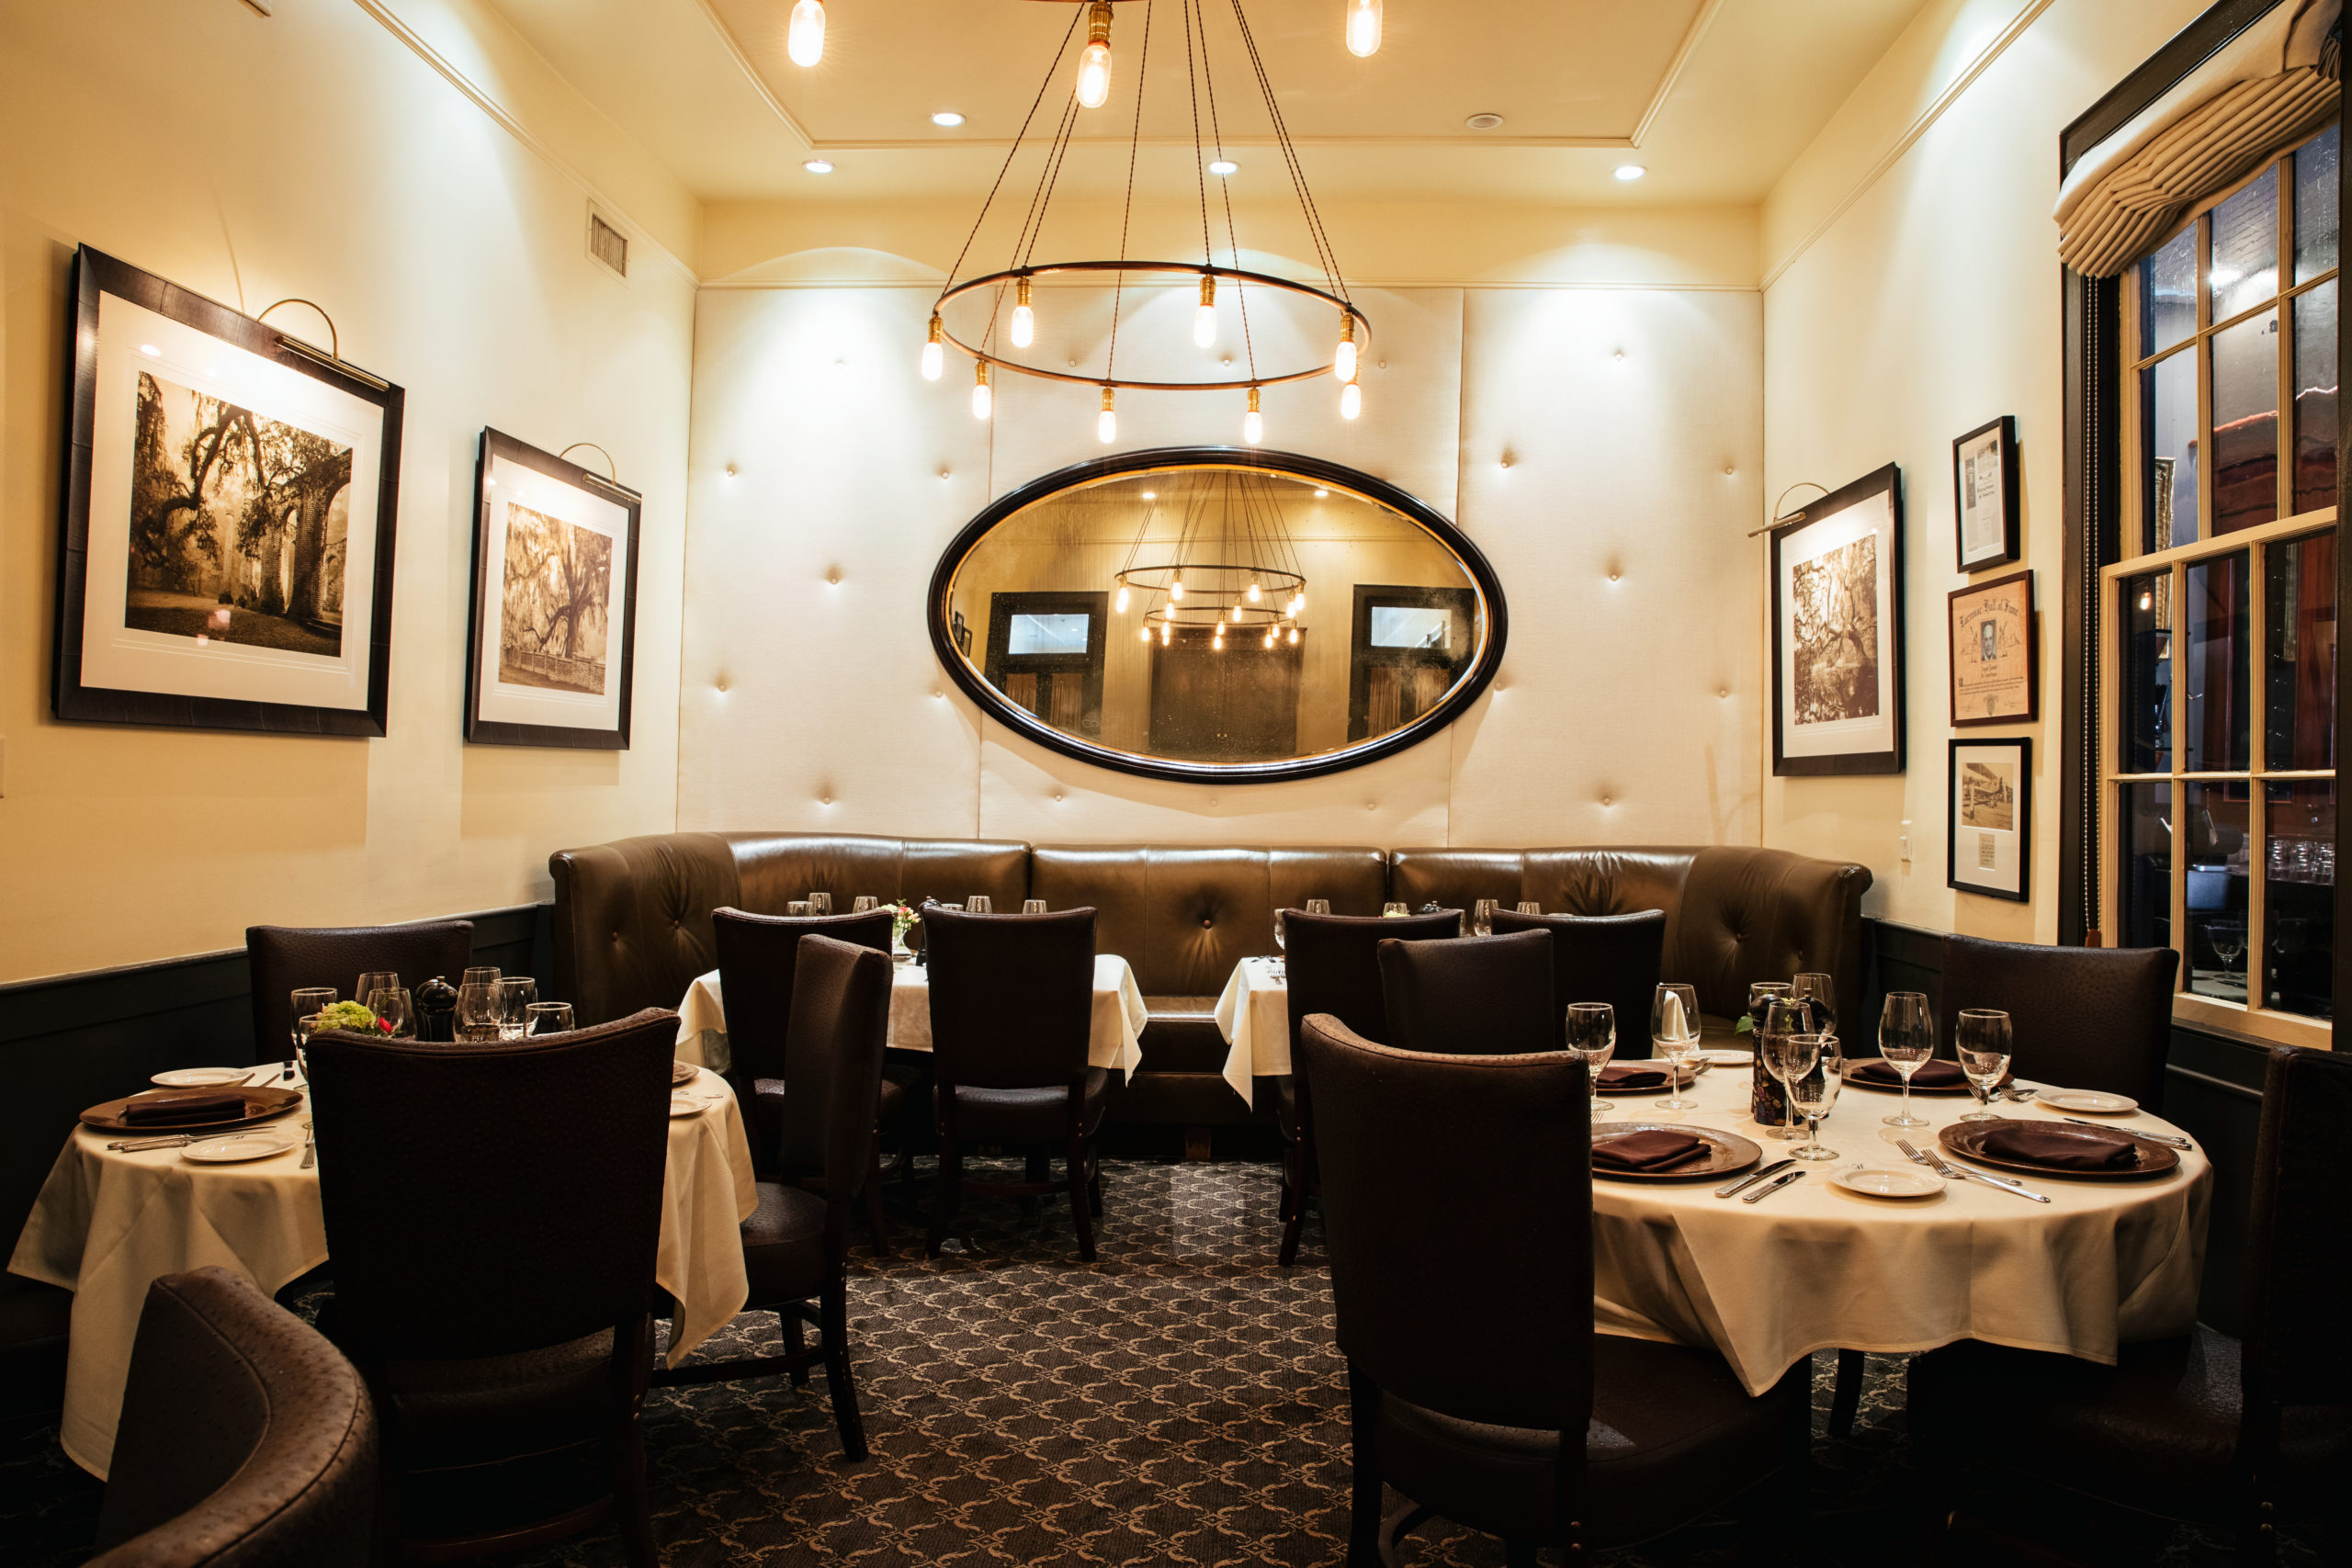 Cozy restaurant dining room with oval mirror on the back wall, accent artwork and large round chandelier overhead